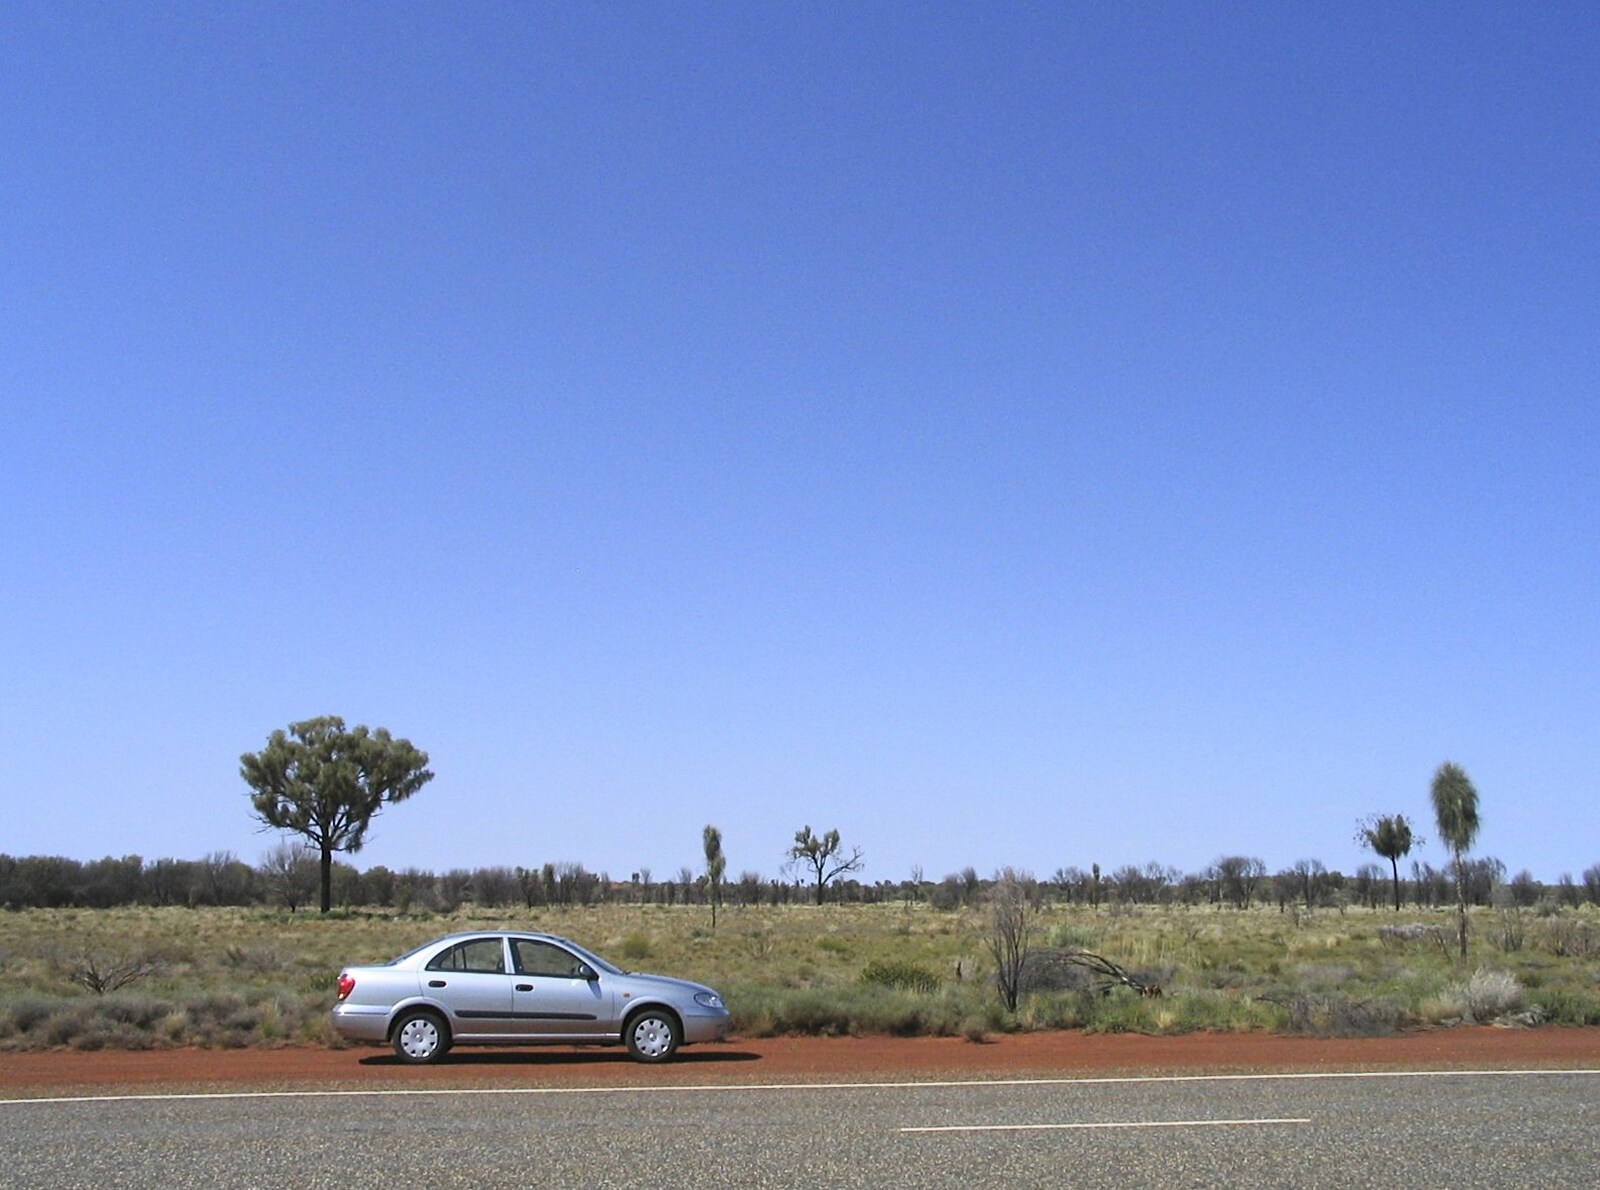 Nosher's hired car from The Red Centre: Yulara and Uluru, Northern Territories, Australia - 8th October 2004